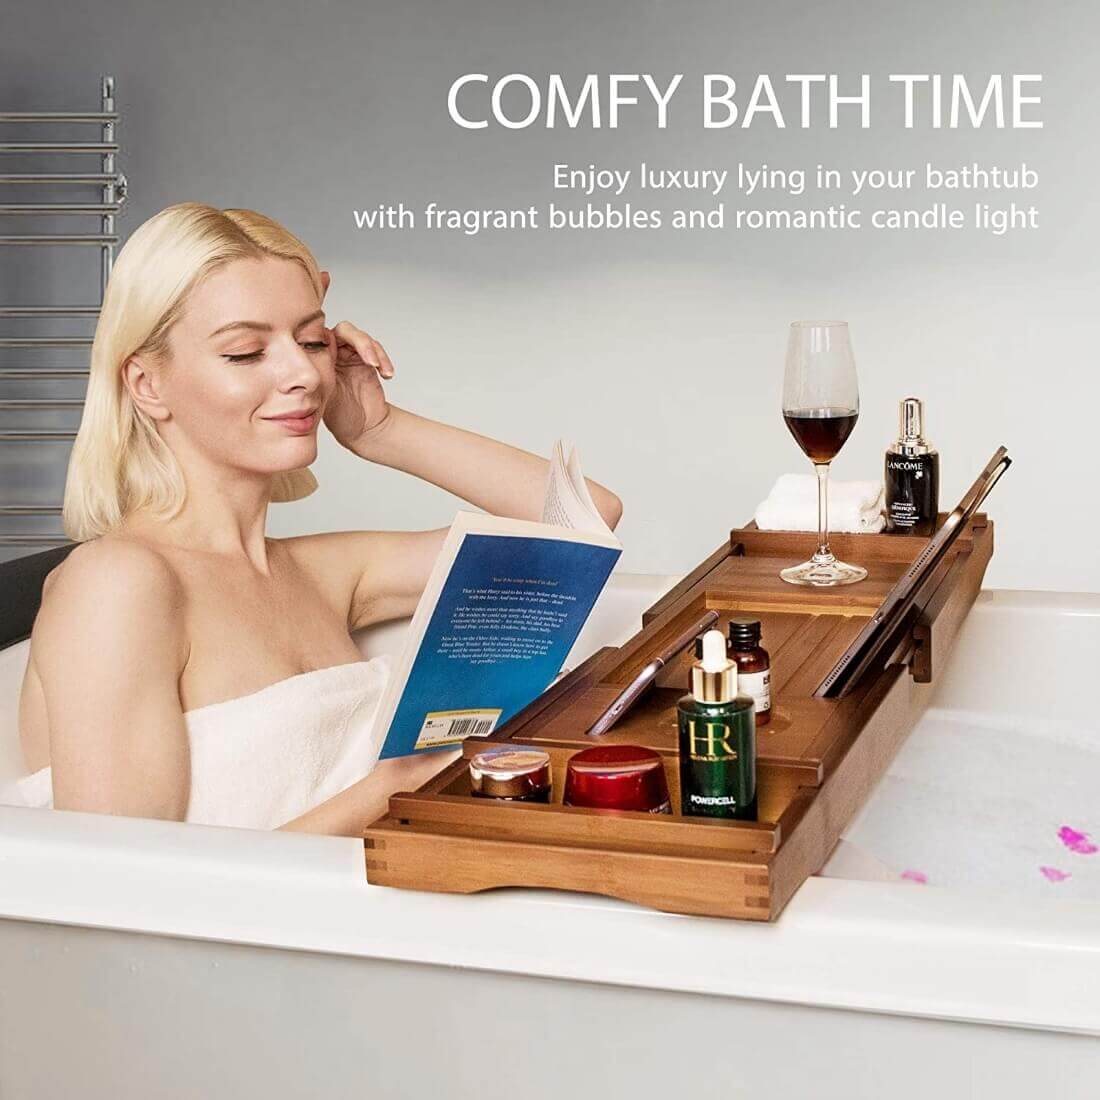 VIVOHOME Expandable 43 Inch Bamboo Bathtub Caddy Tray with Smartphone Tablet Book Holders, Soap Tray, Wine Glass Slot, Brown